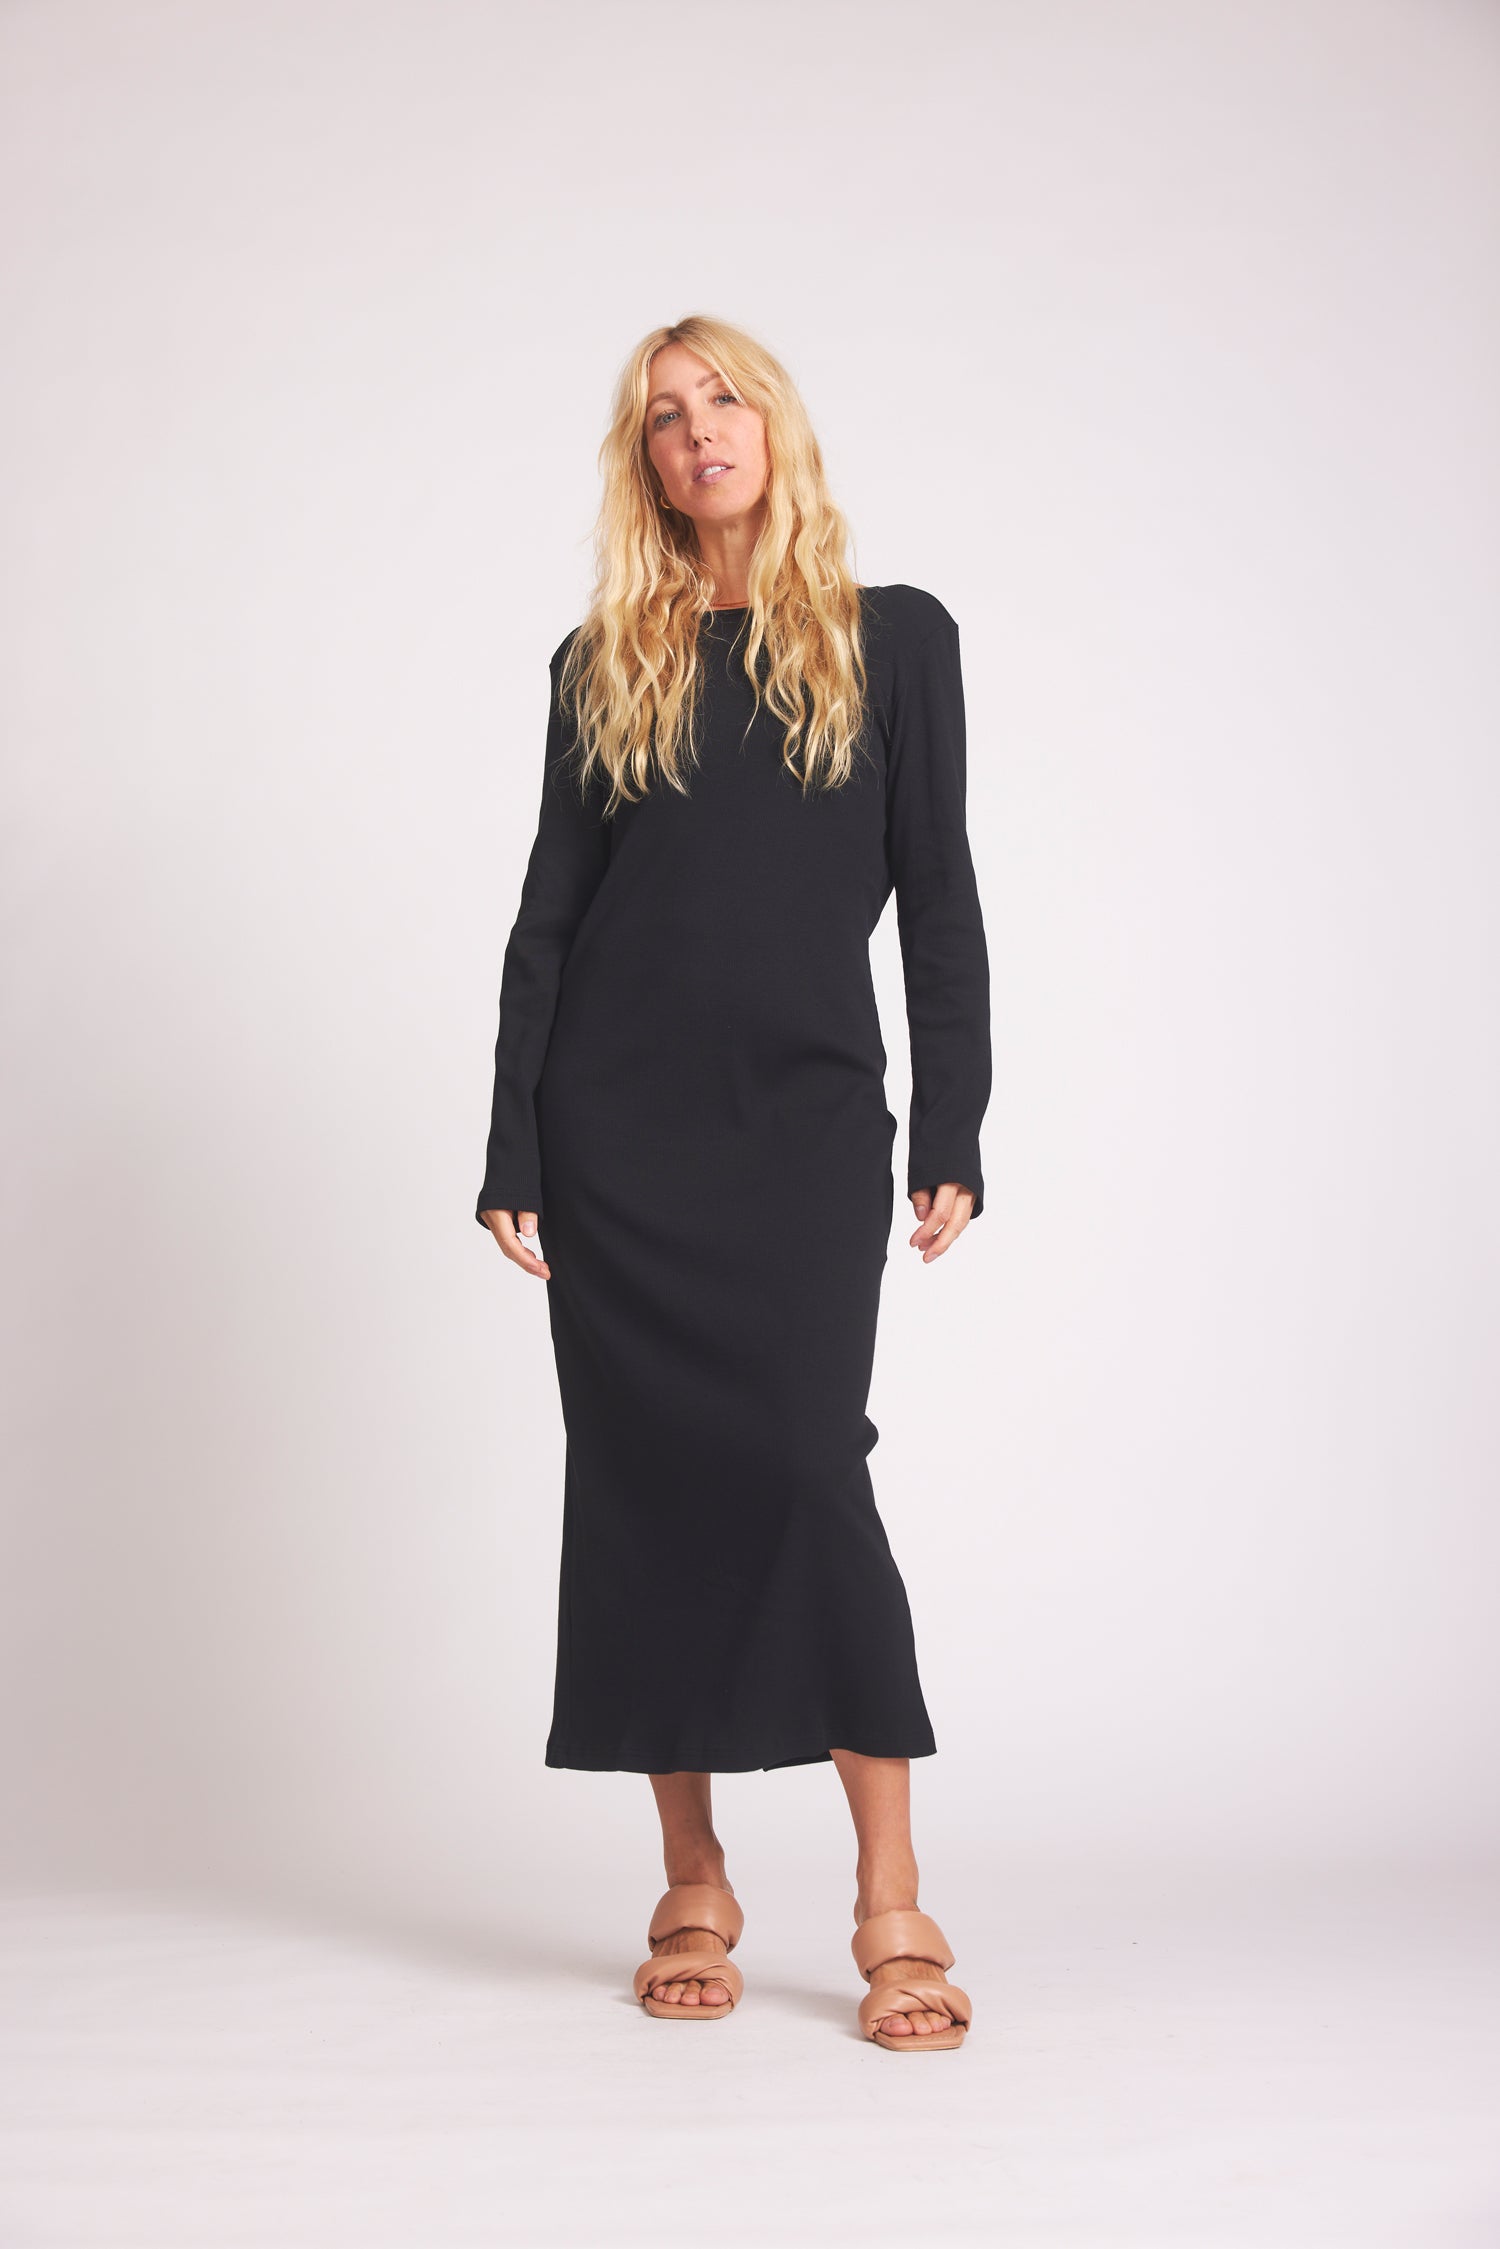 Black Bina dress made of organic cotton from Baige the Label